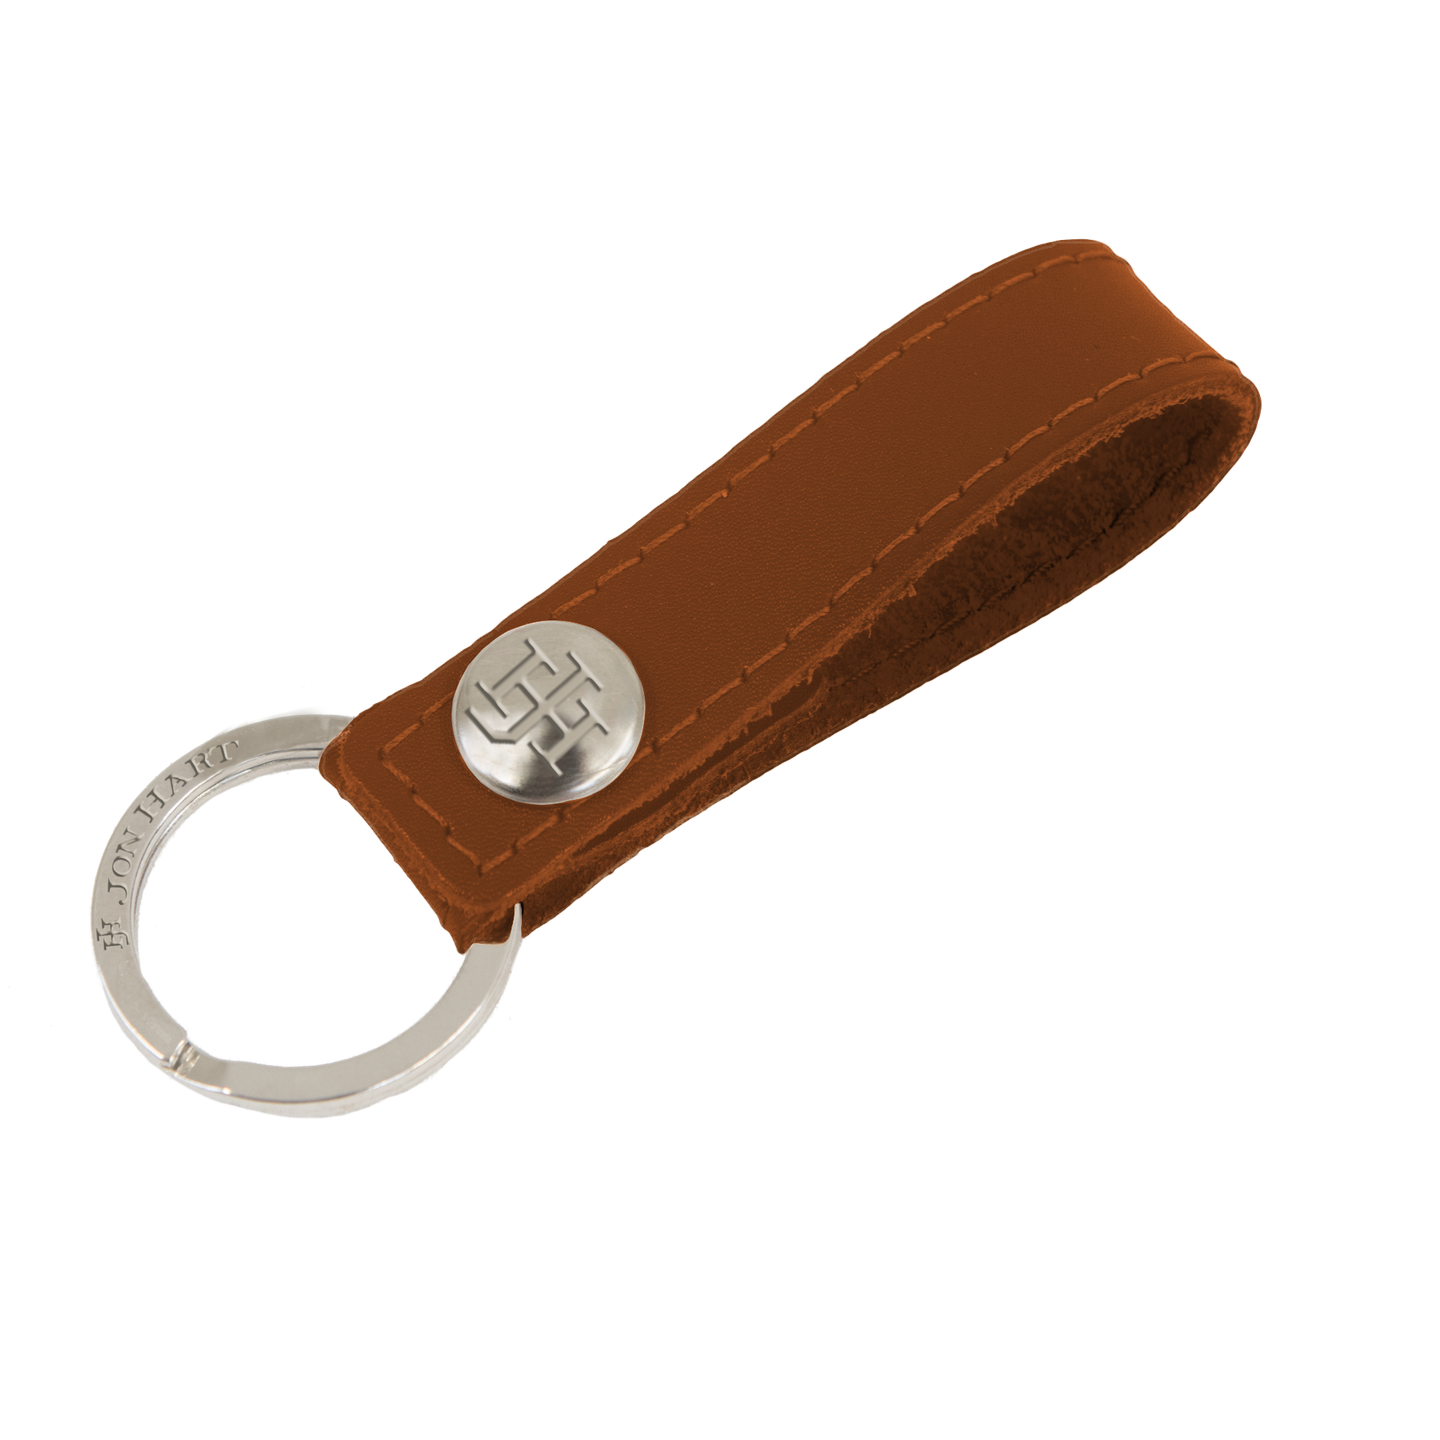 Key Ring - Bridle Leather Front Angle in Color 'Bridle Leather'